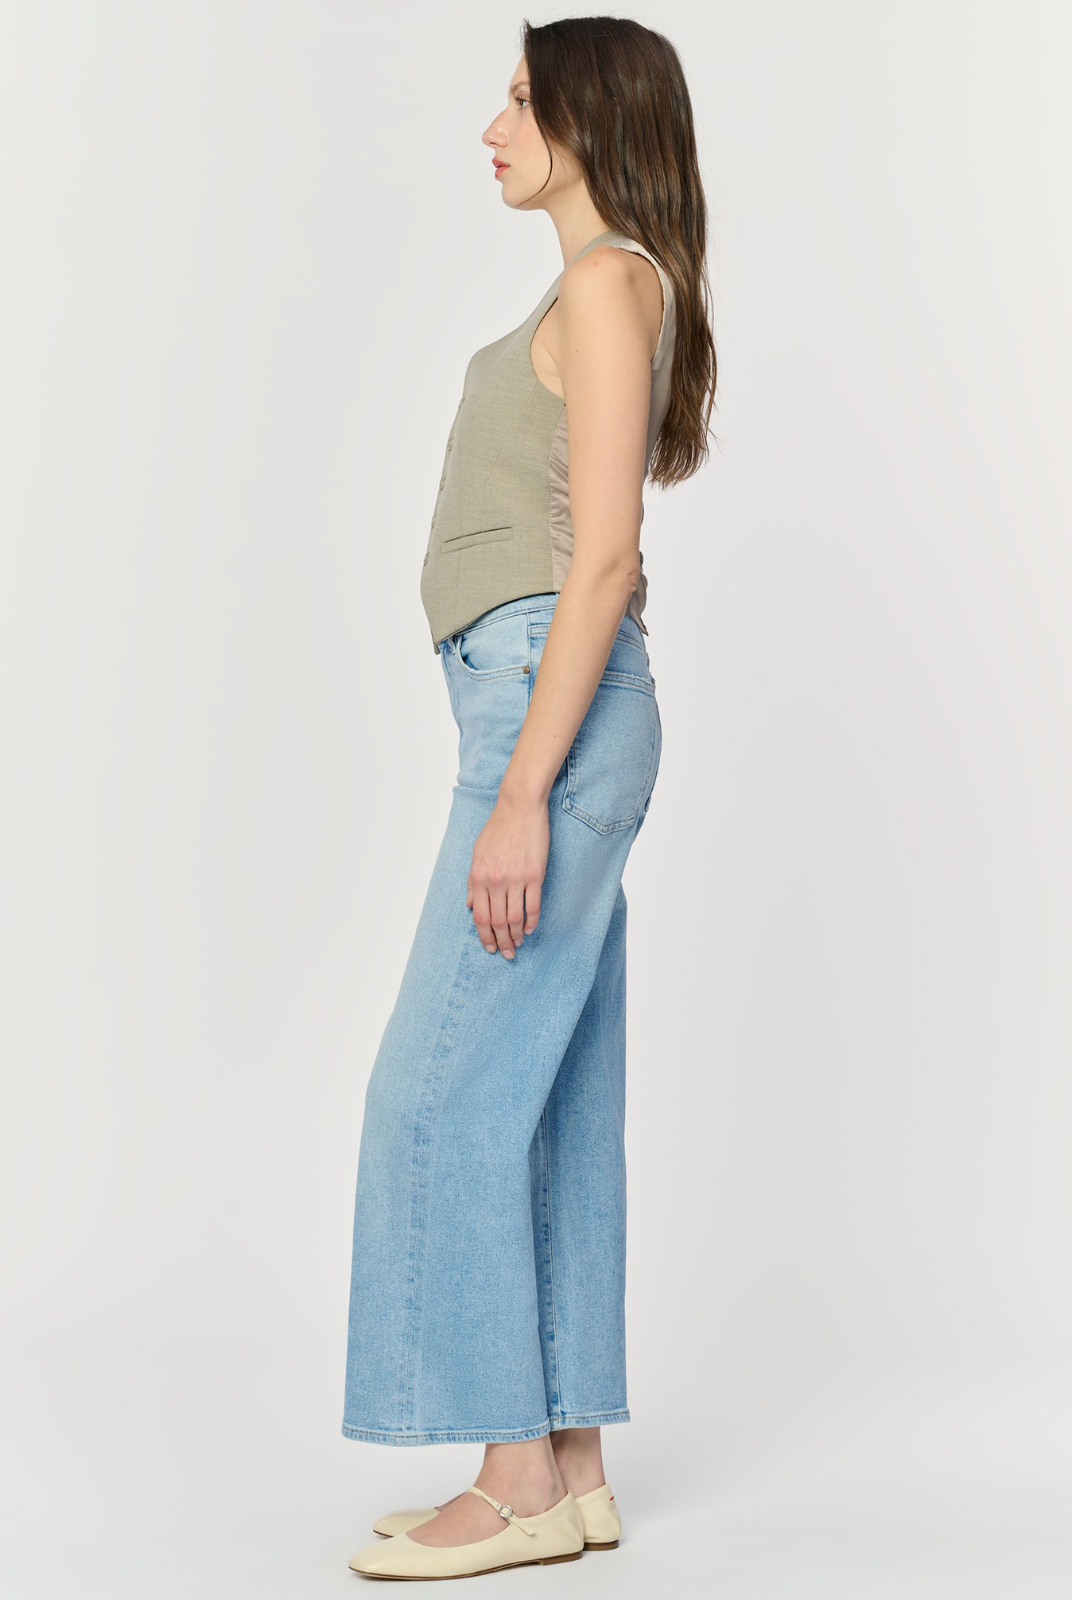 Warp+Weft ICN Wide Leg Jean<p class="MsoNormal">A nod to trendsetting style in Seoul, this high-rise style is a fresh alternative to your skinnies. Sculpts through the midsection and widens out through the leg to a flattering A-line shape. Modern, timeless and versatile.<u></u><u></u></p> <p class="MsoNormal">&nbsp;</p>